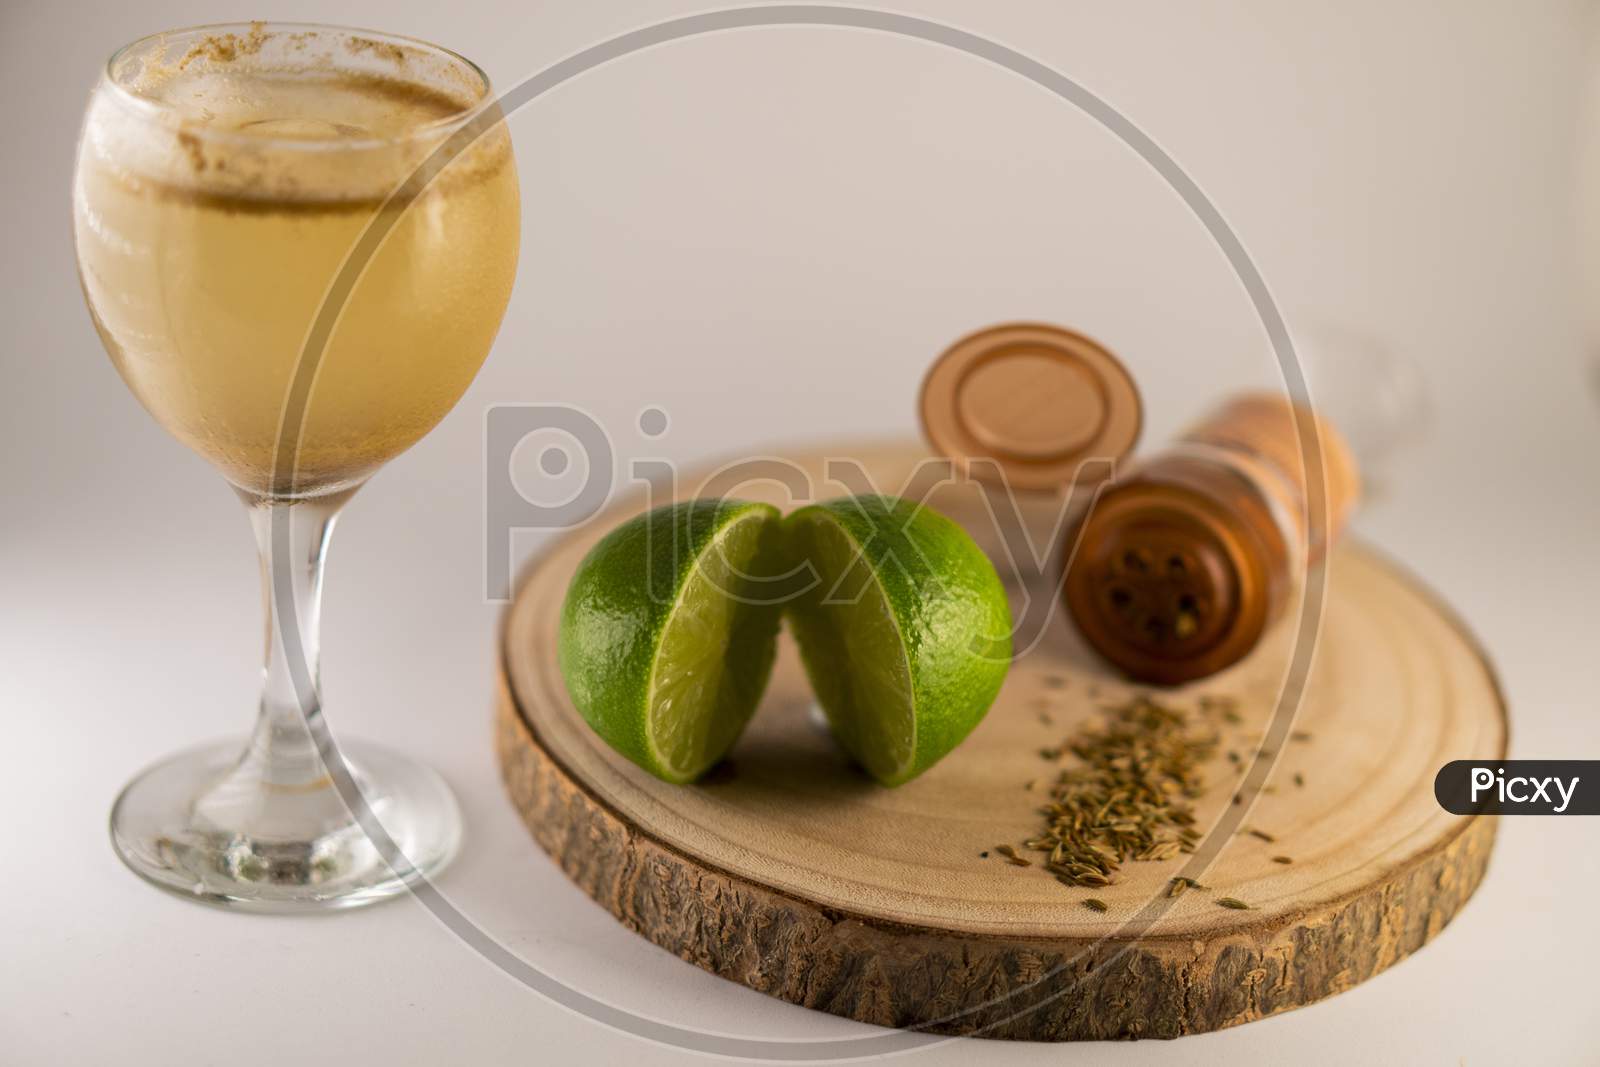 Glass of fresh summer cocktail or mocktail with lemon and herbs garnishing on a white background.